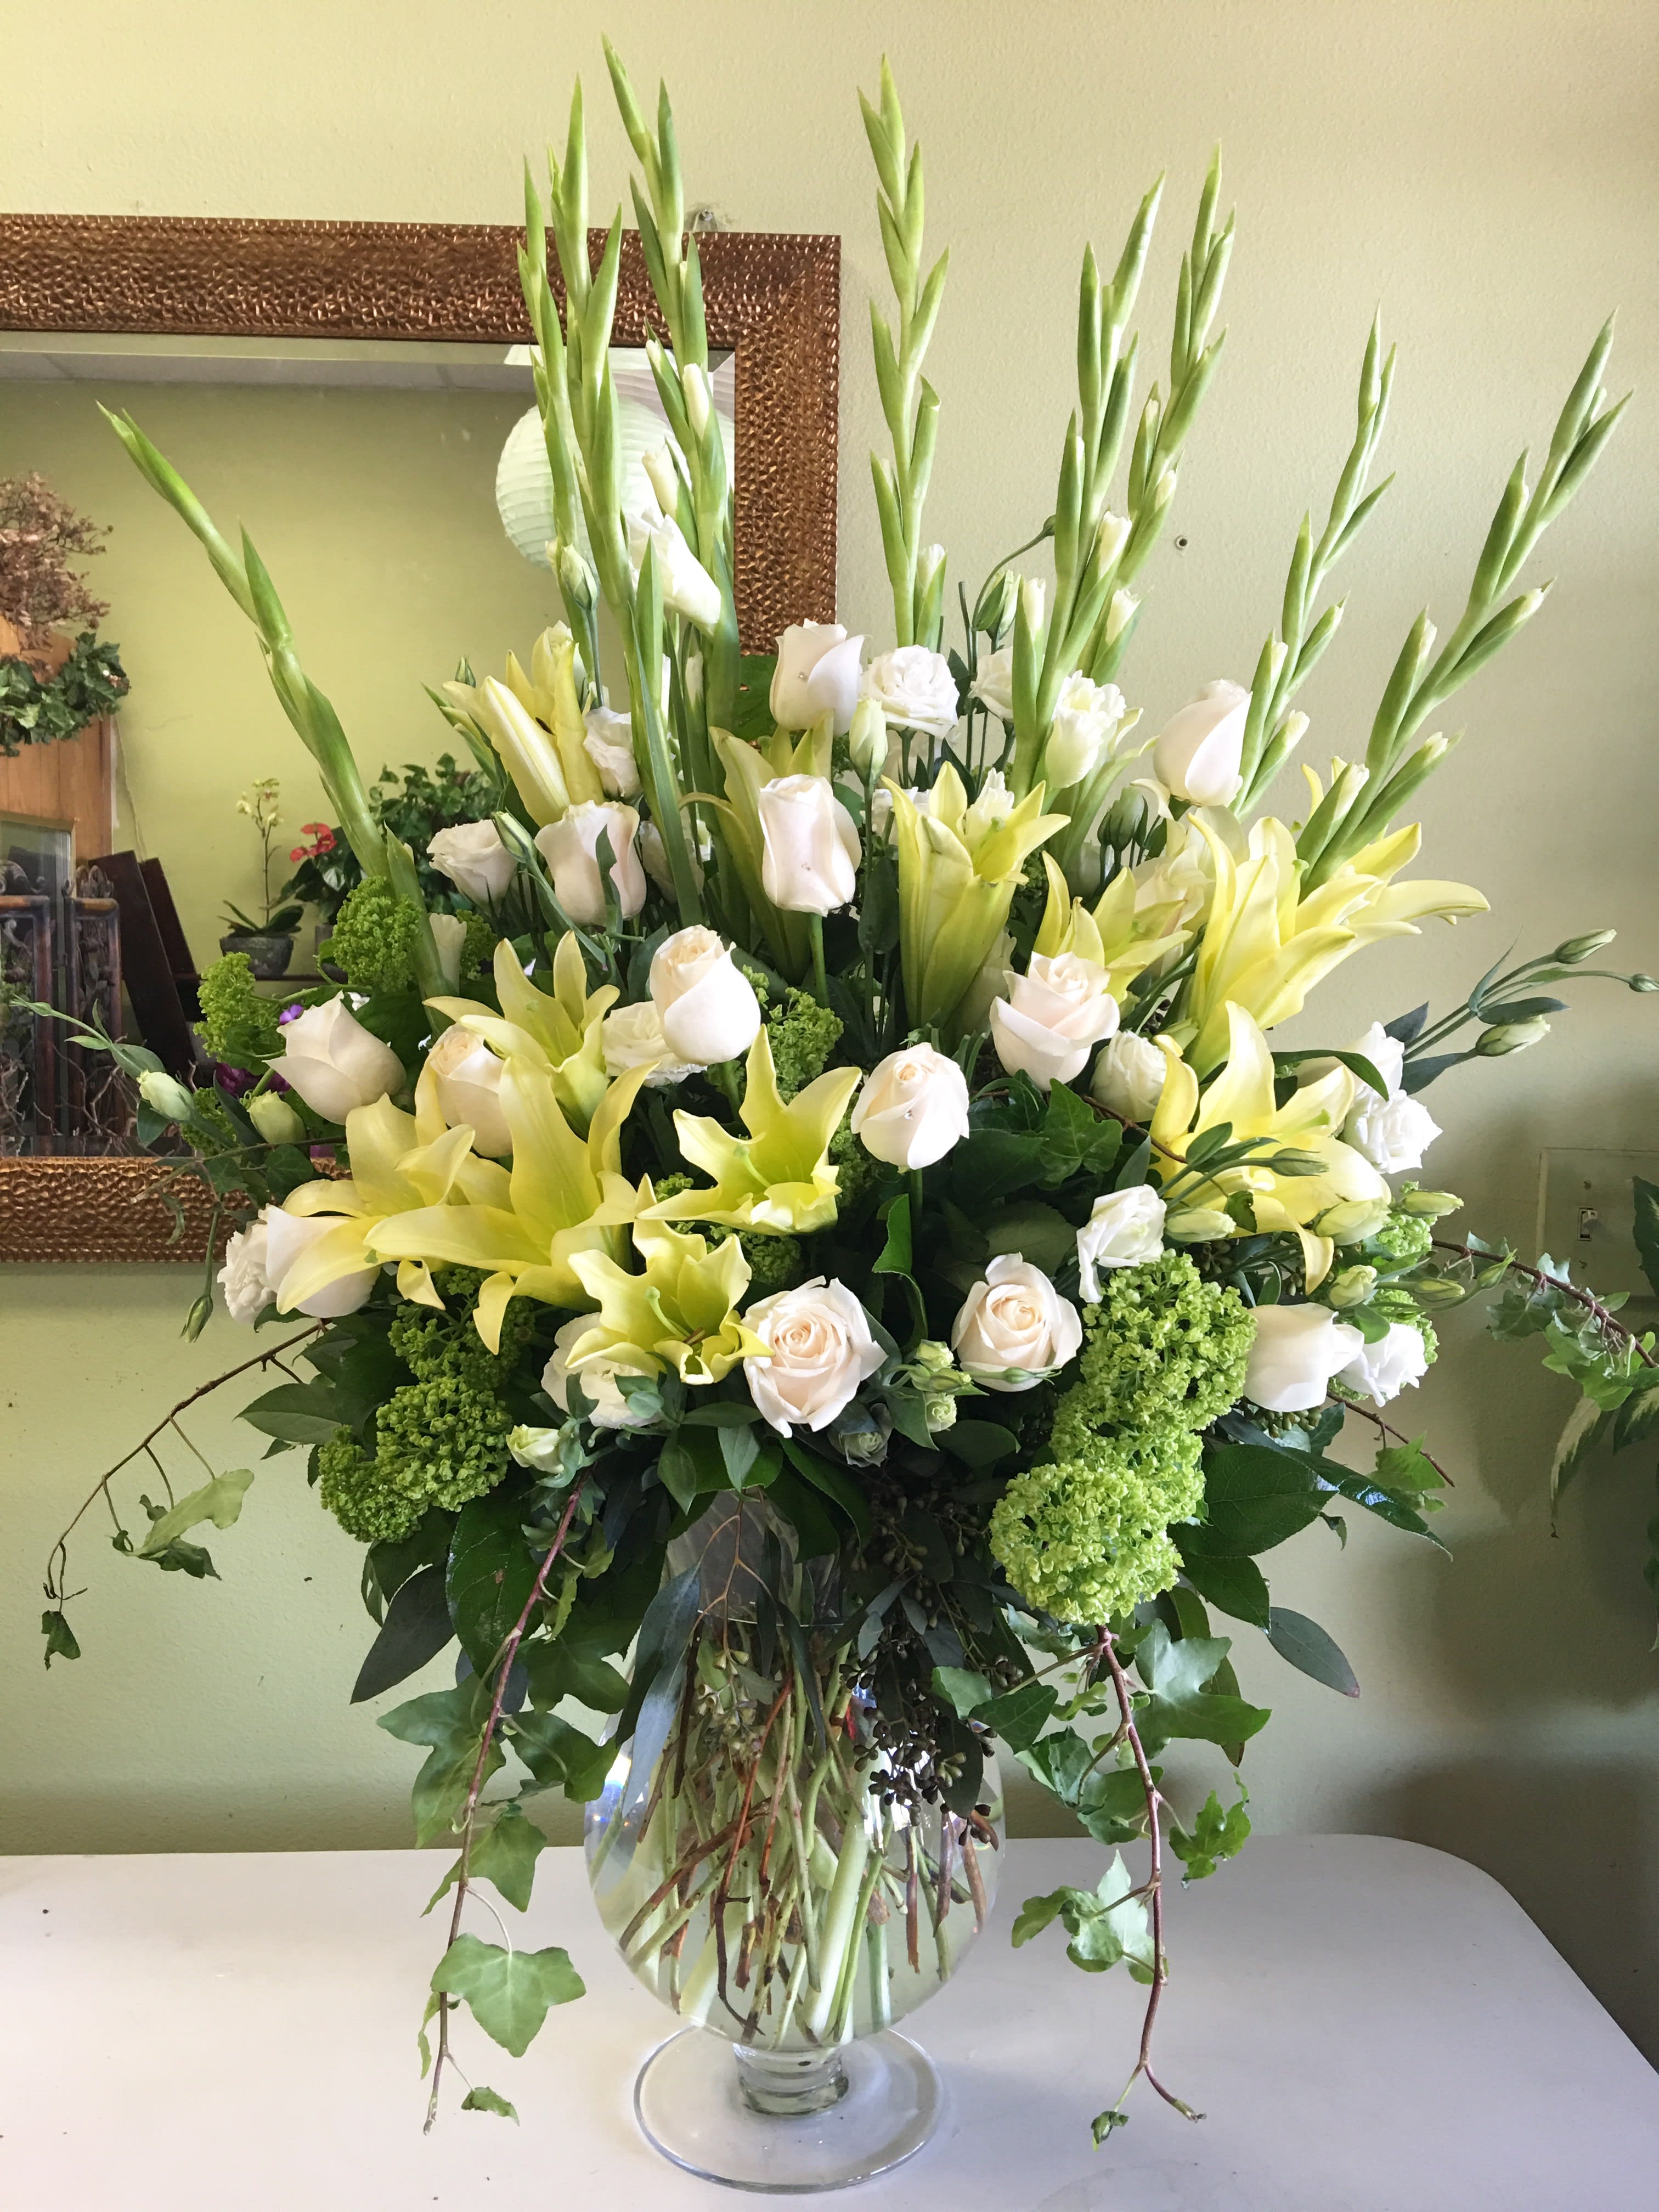 Traditional Victoria Bouquet - Traditional Victoria Bouquet is an elegant and sophisticated arrangement to convey your heartfelt sentiments. All white lilies, roses, larkspur, stock and traditional gladiolus are designed in a stylish flared pedestal vase. Approx. 40H x 40W